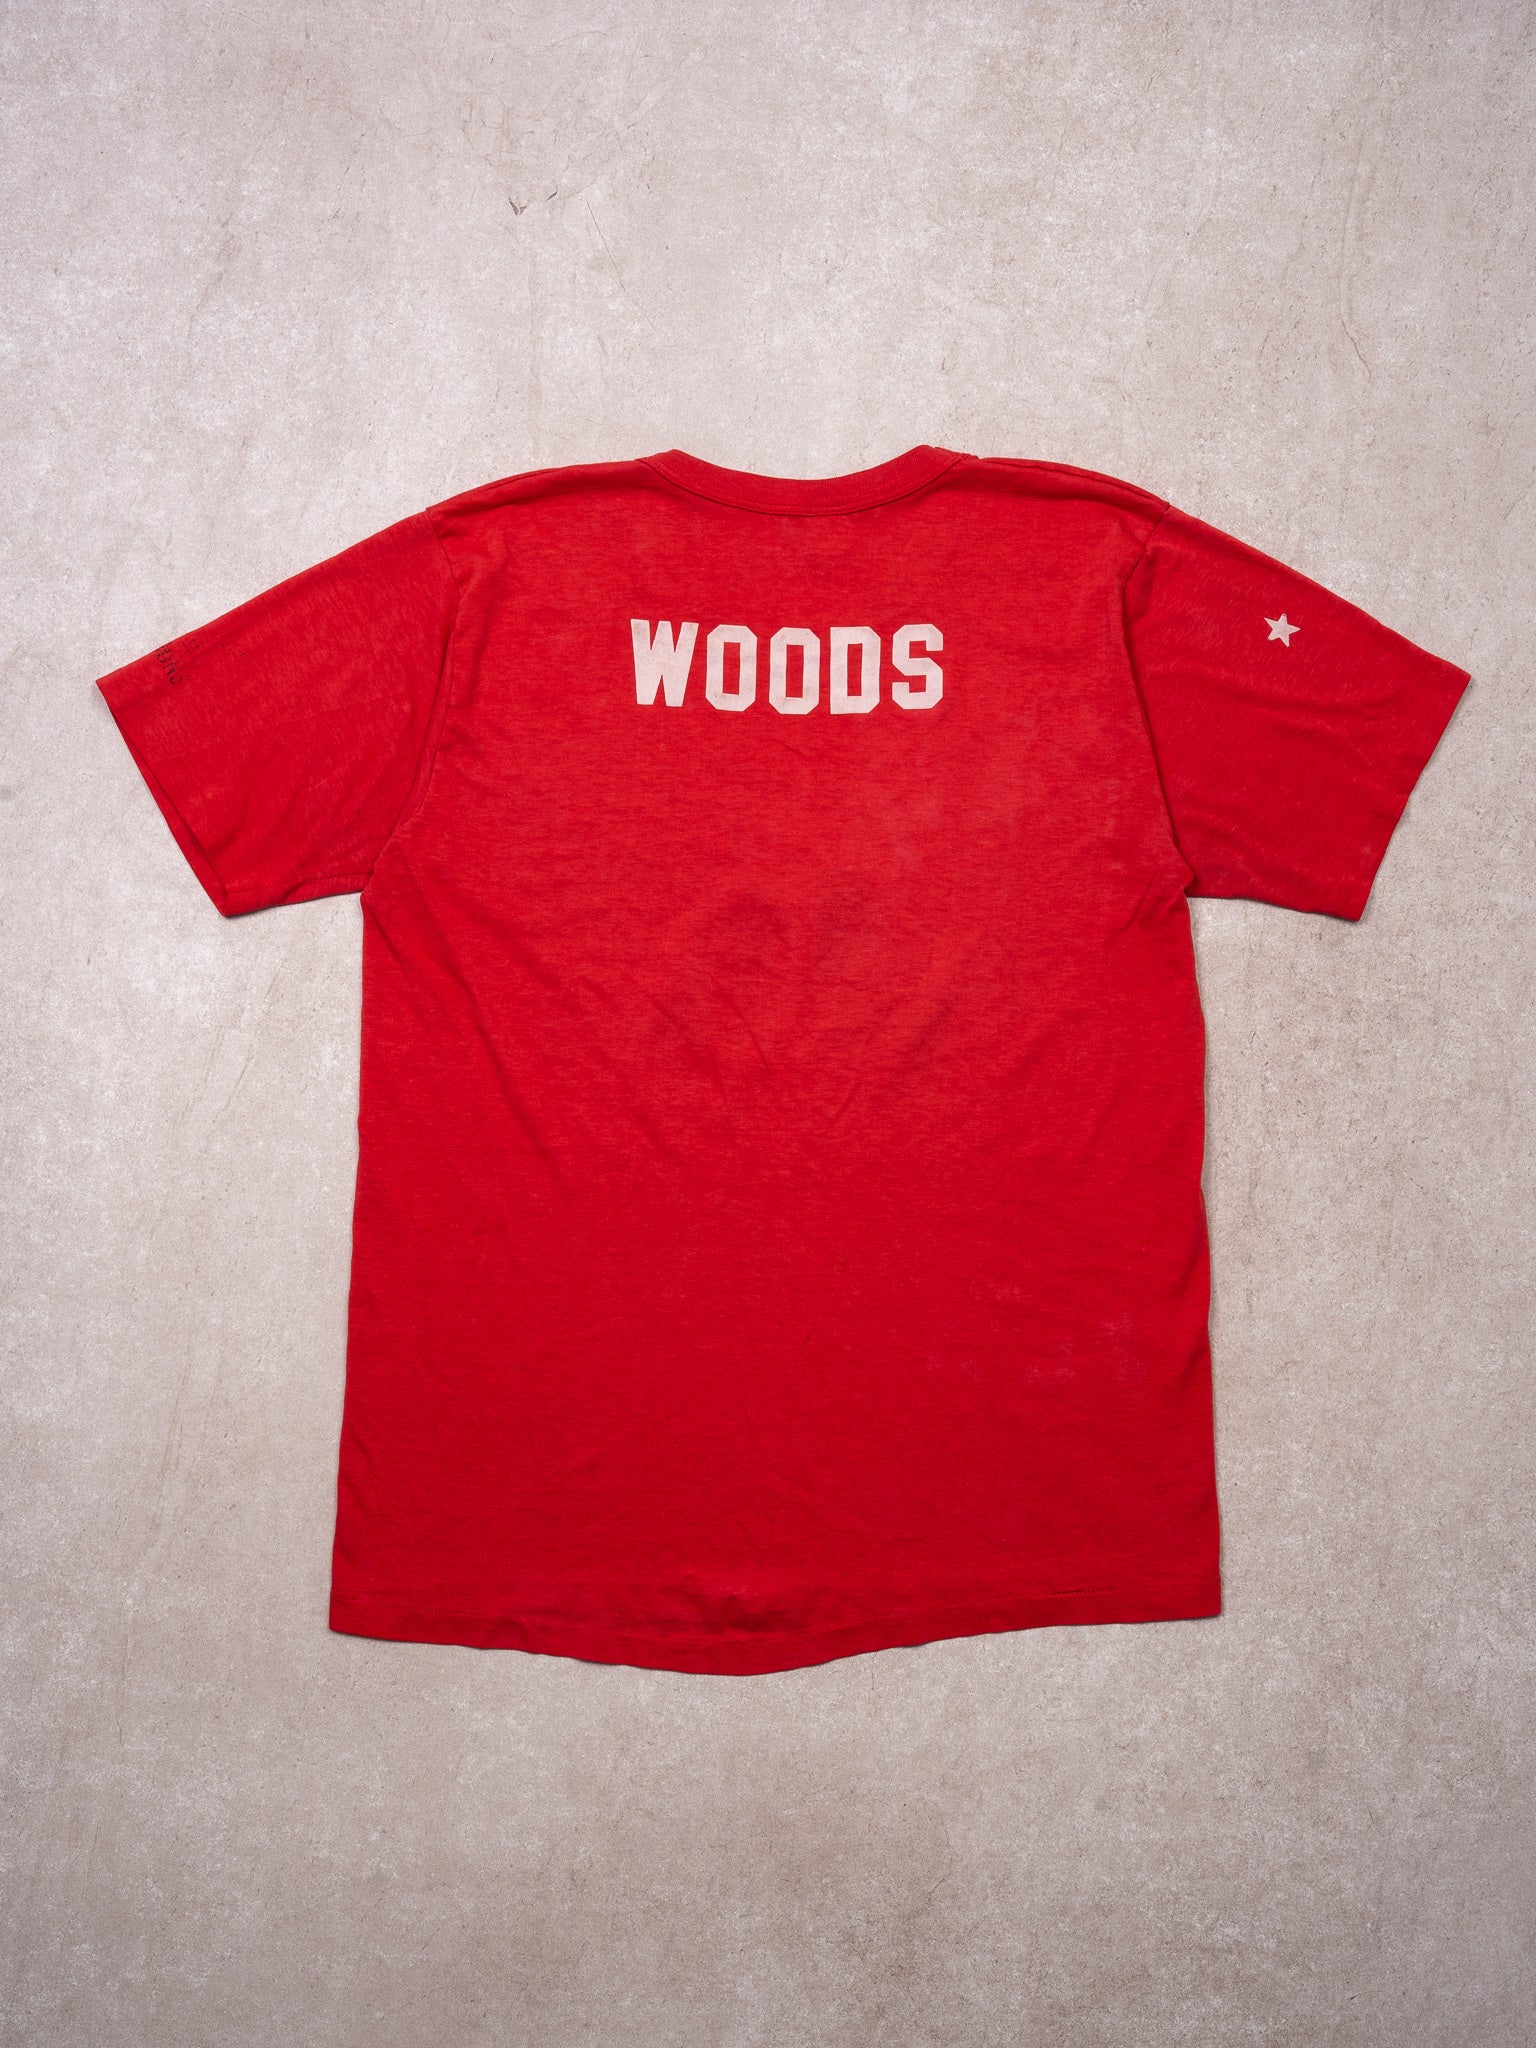 Vintage 80s Red Inroads Single Stitch Tee (S)